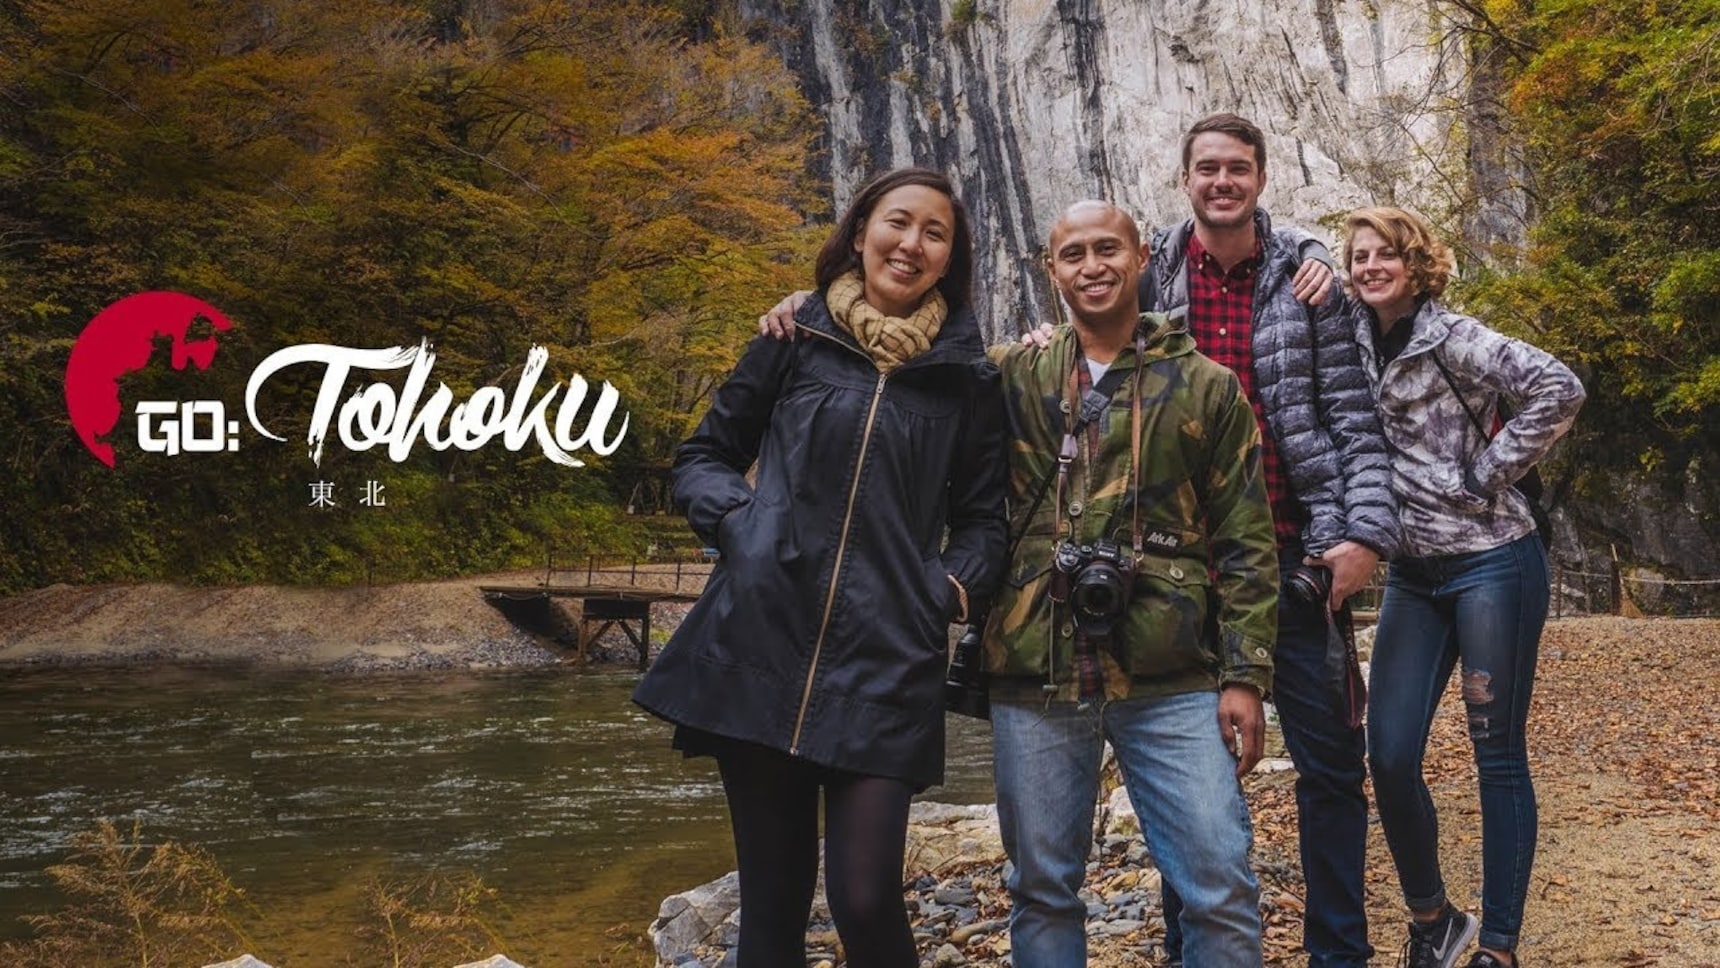 4 Americans on a Mission of Tohoku Discovery